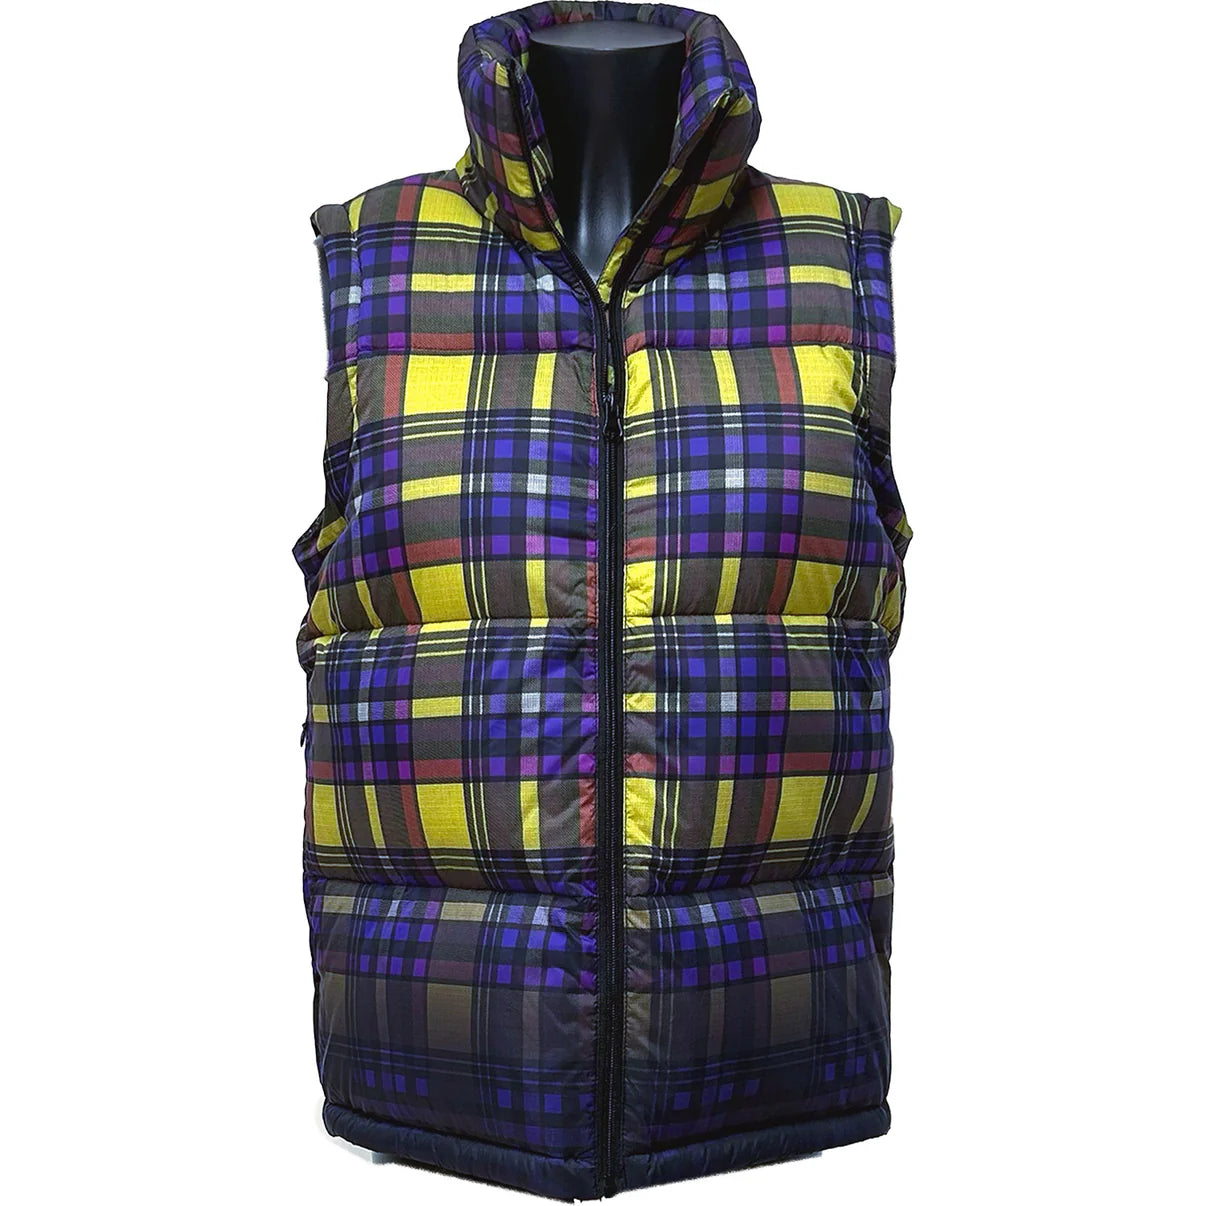 SALE downjacket tartan with removable arms yelllow/purple